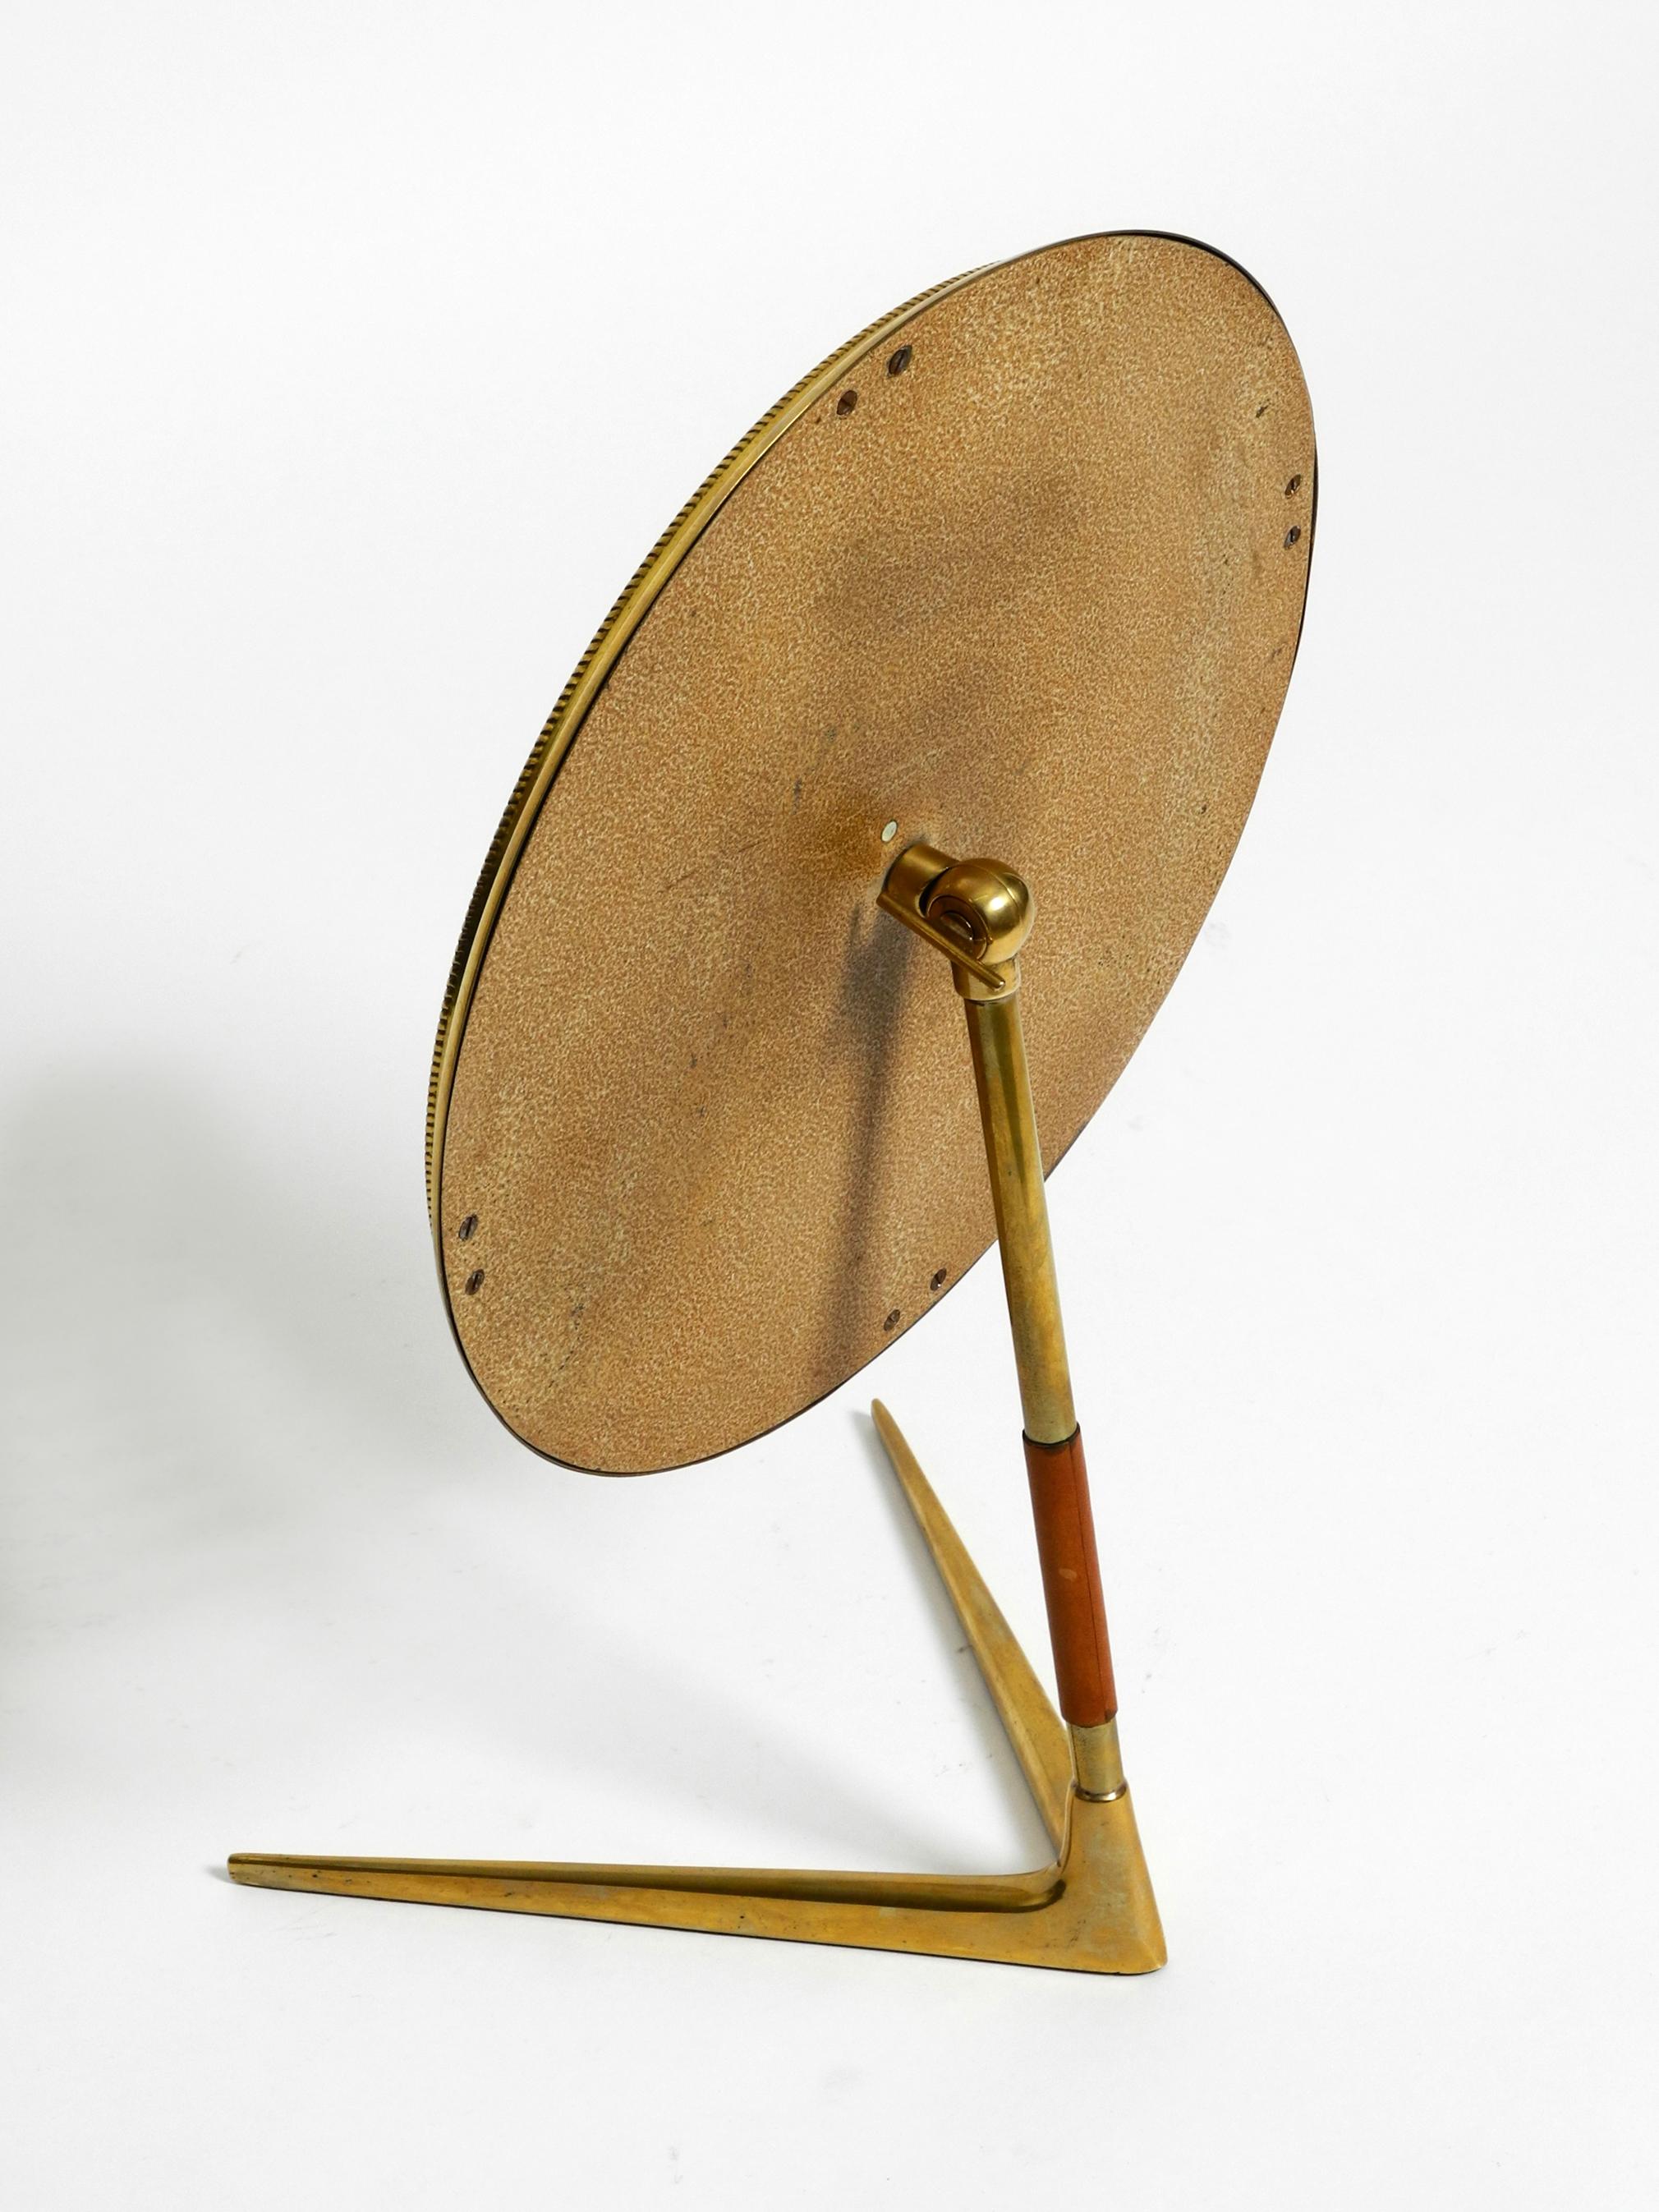 Mid-20th Century Large Italian Midcentury Crow's Foot Table Mirror Made of Brass and Leather